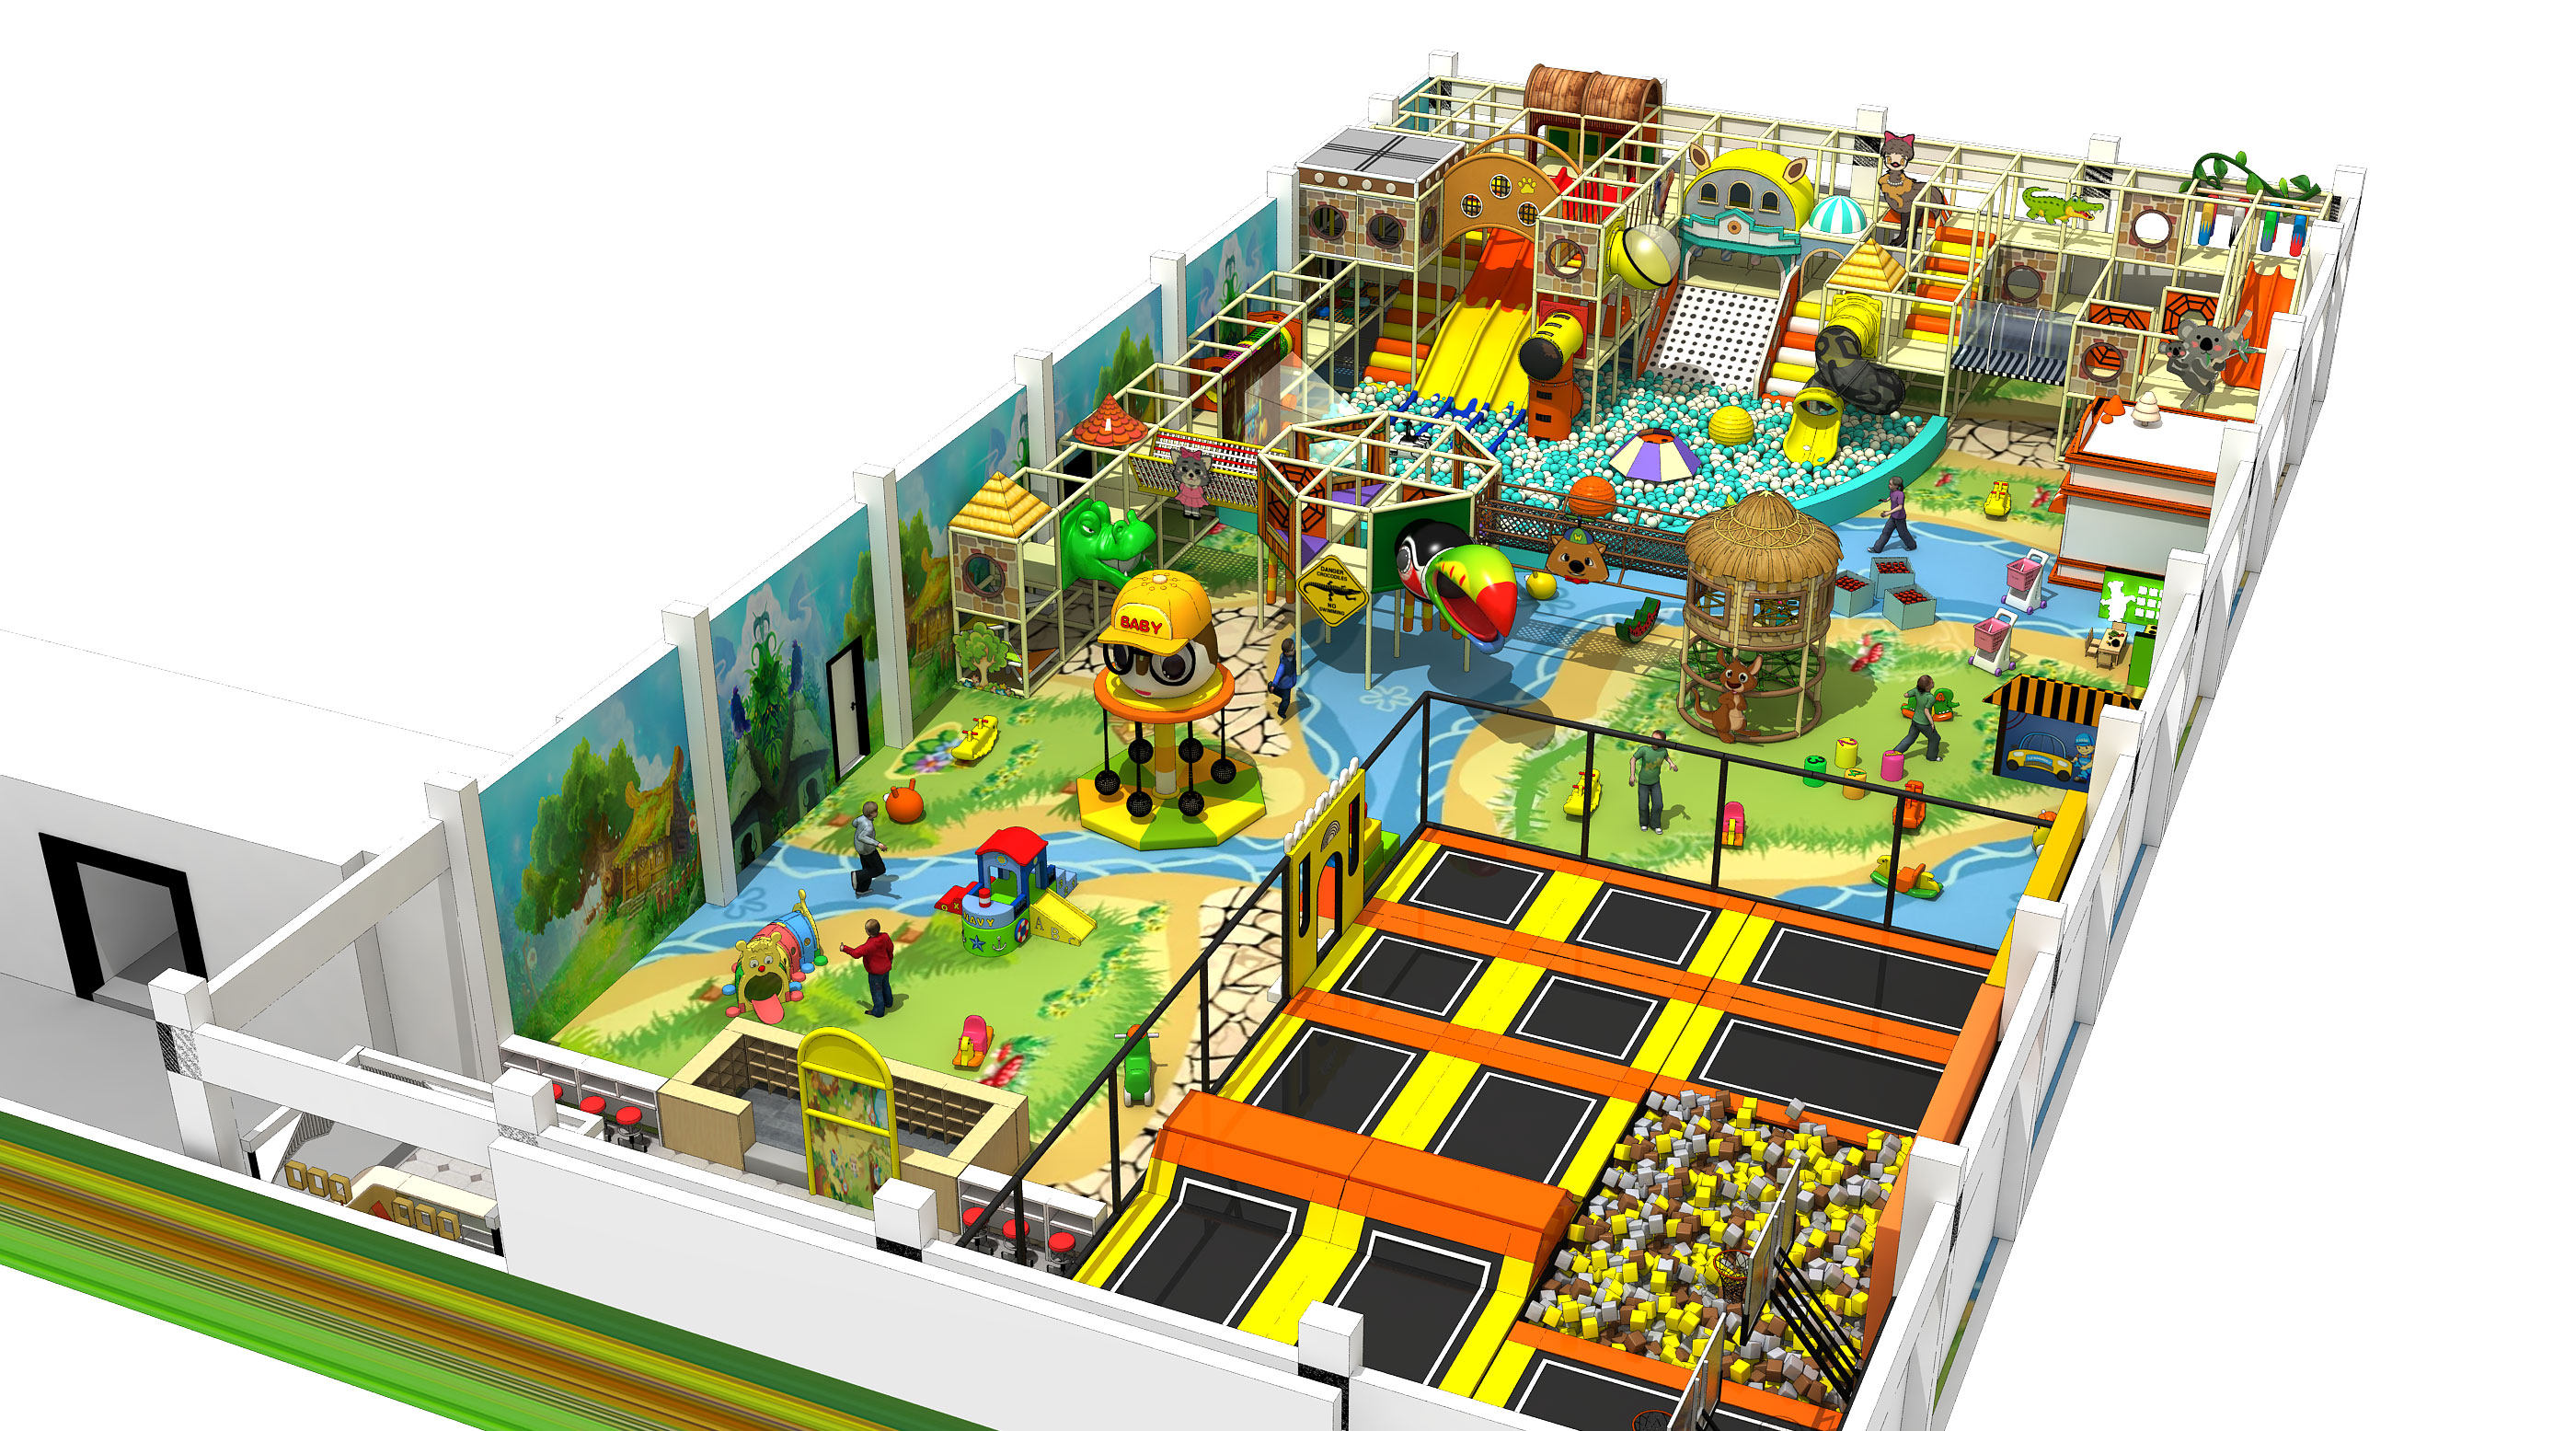 Where you can find a premium indoor playground supplier in china?